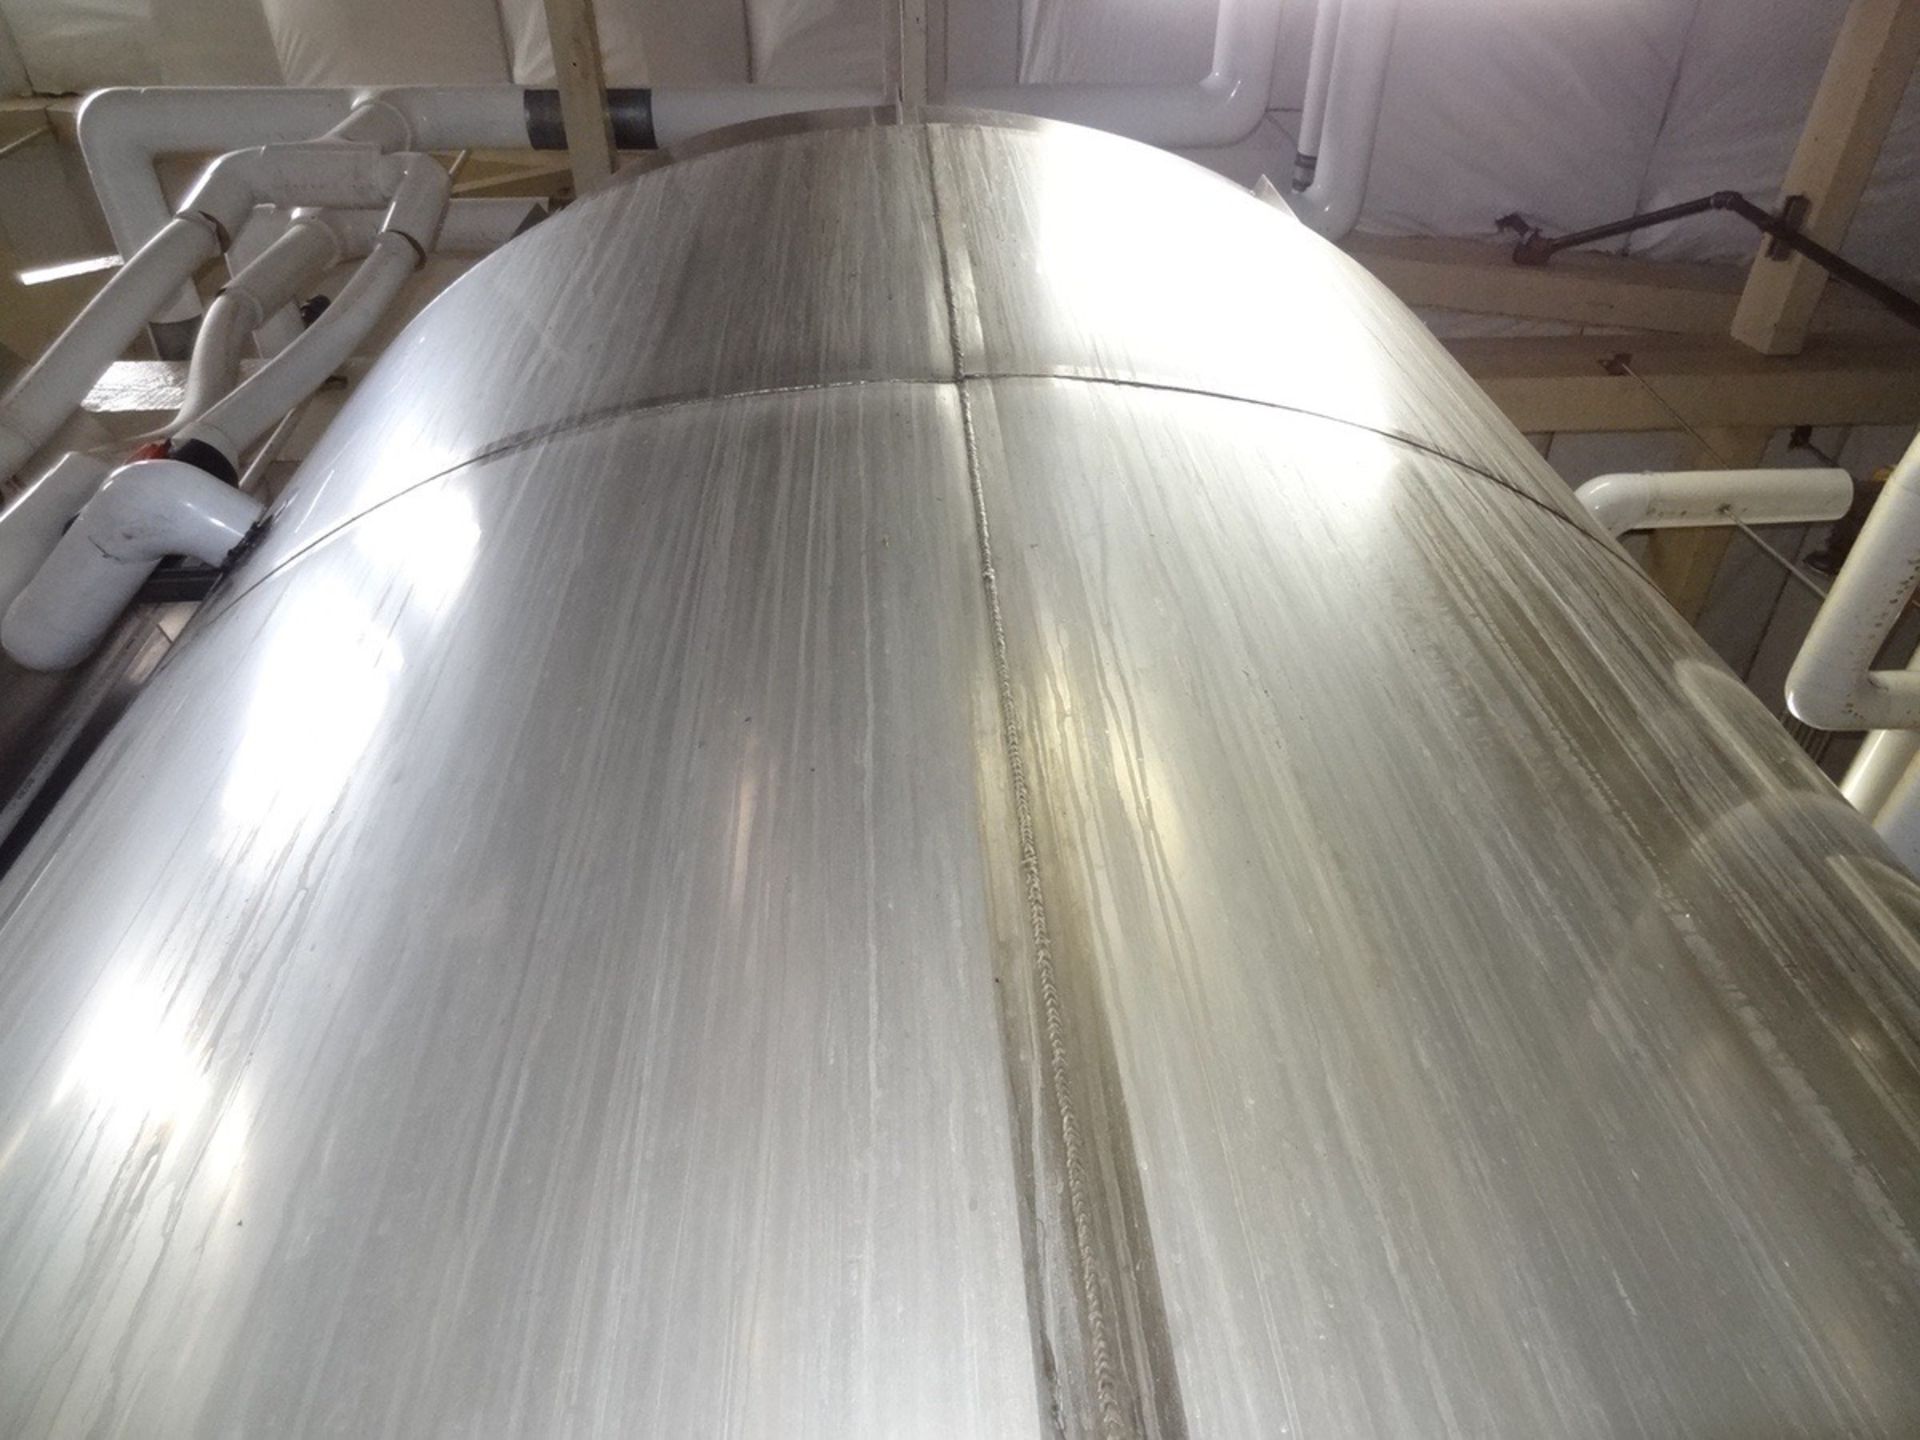 2002 JV Northwest 164 Barrel/5,000 Gallon Stainless Steel Jacketed Fermenter, Top A | Rig Fee: $2250 - Image 2 of 10